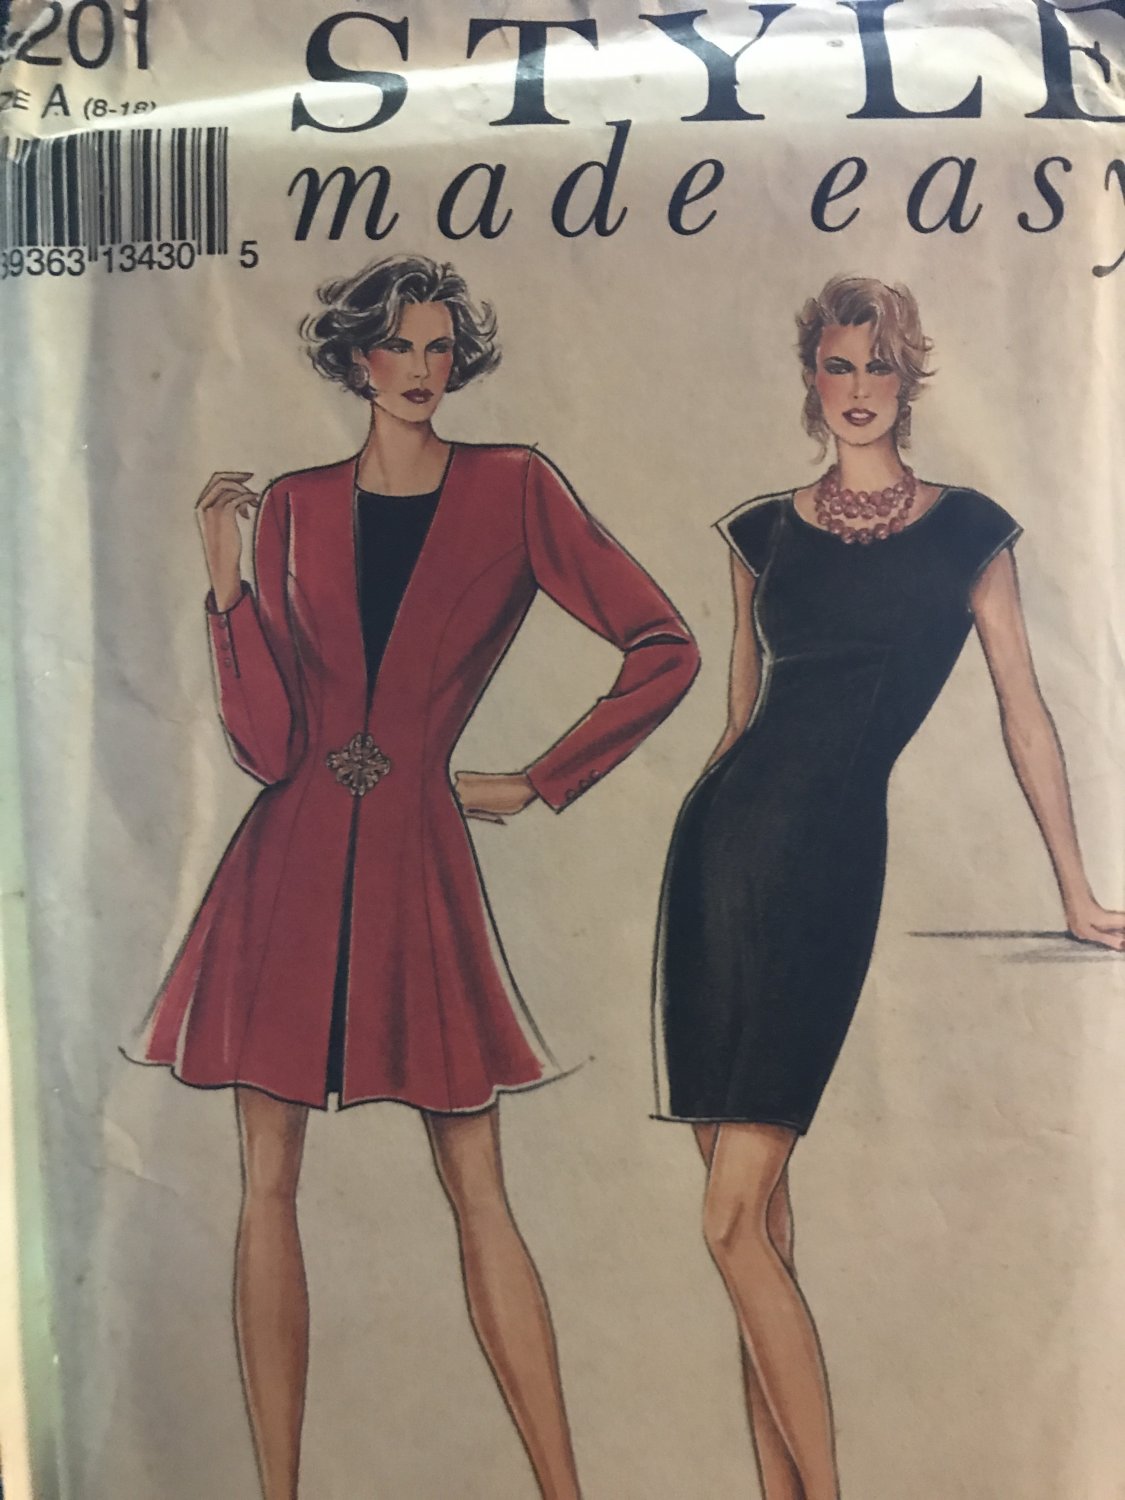 Style 2201 Misses Dress and Jacket Sewing Pattern size 8 - 18 Uncut